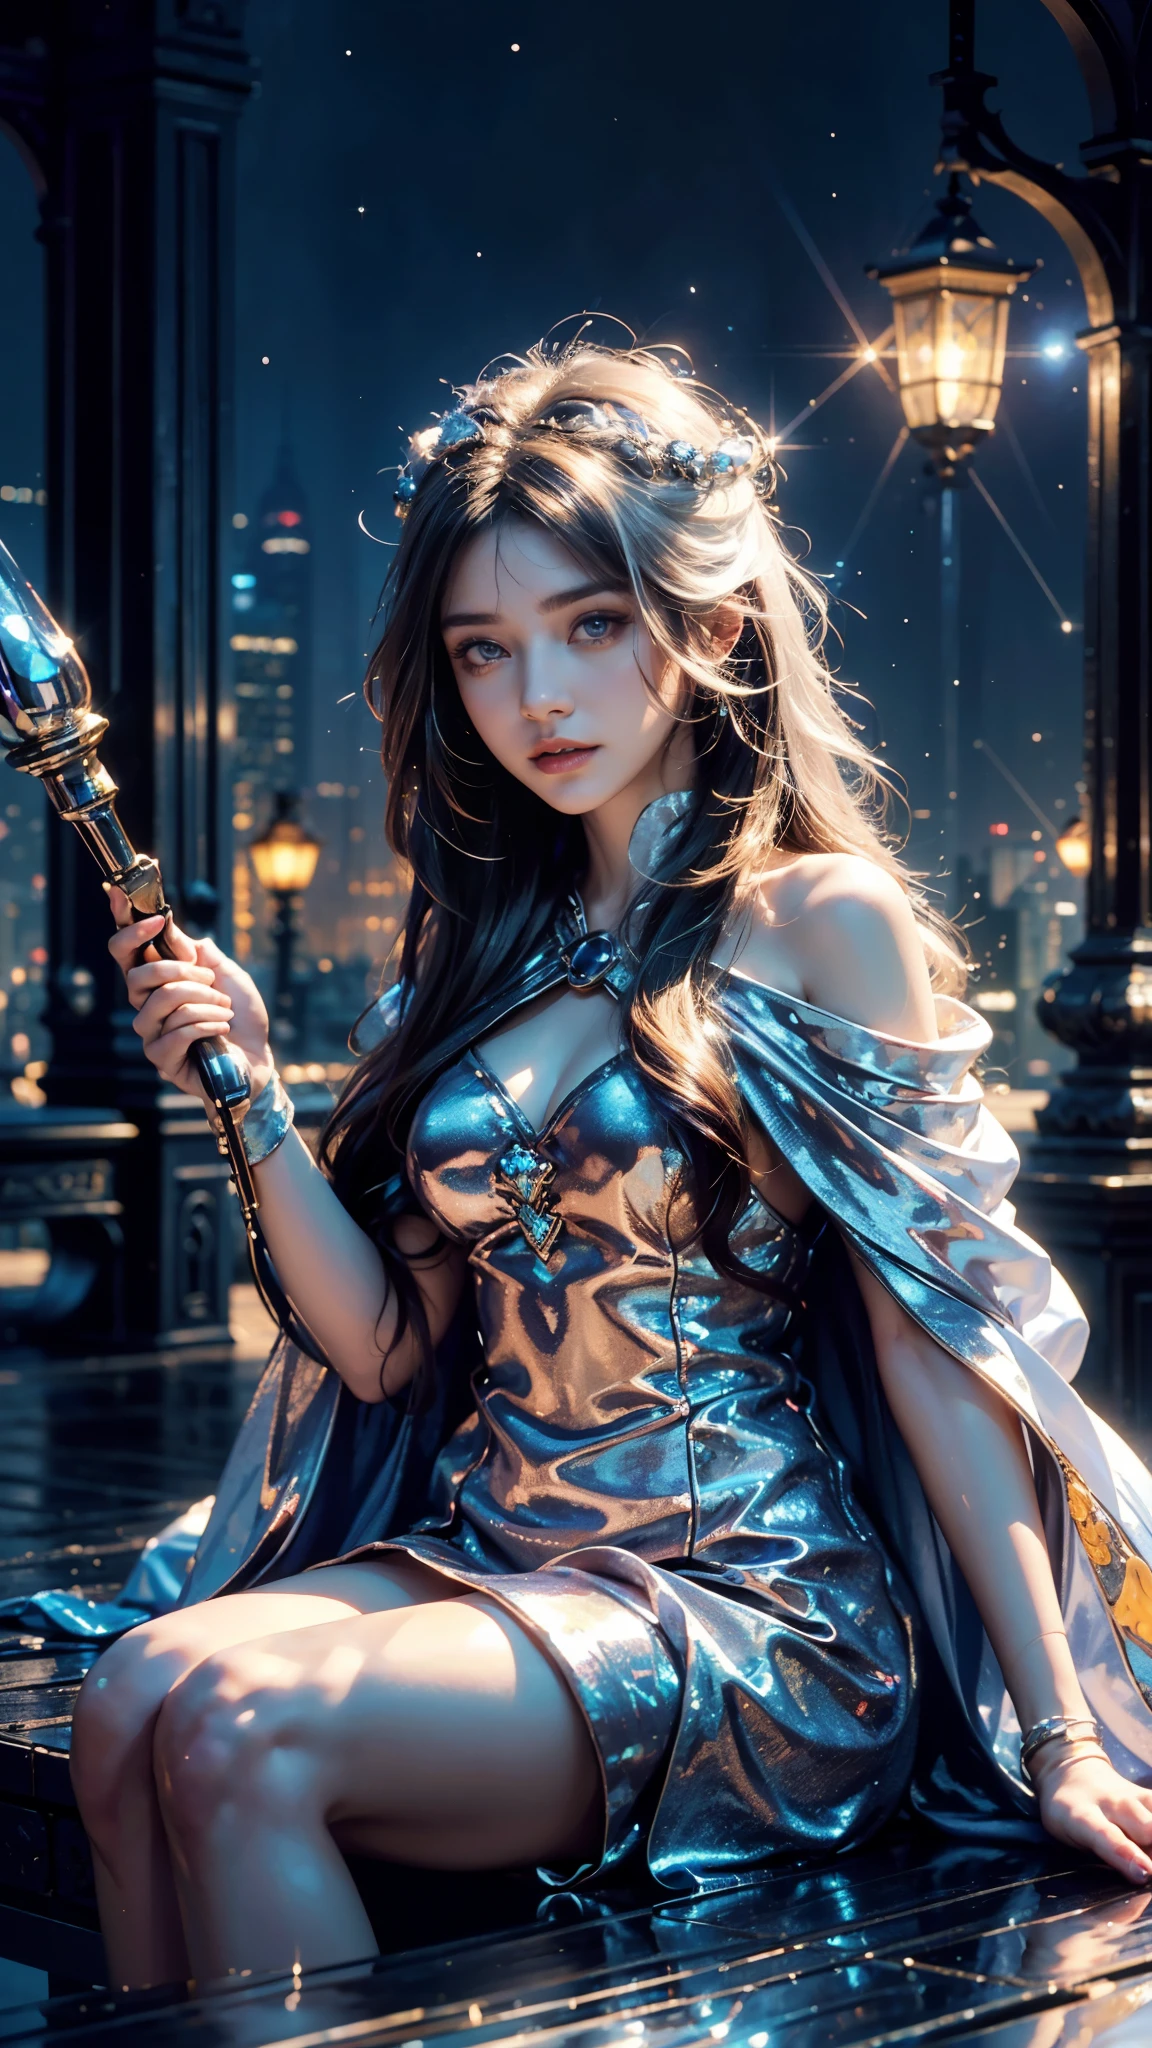 4k, UHD, masterpiece, 1 girl, good face, ((detailed eyes)), very long hair, impressive hairstyle, perfect brasts, fantasy cosplay, ((white cosplay)), strap cosplay, cape, night city, building, lamps, depth of field, reflection light, ((sparkle)), chromatic aberration, sitting,